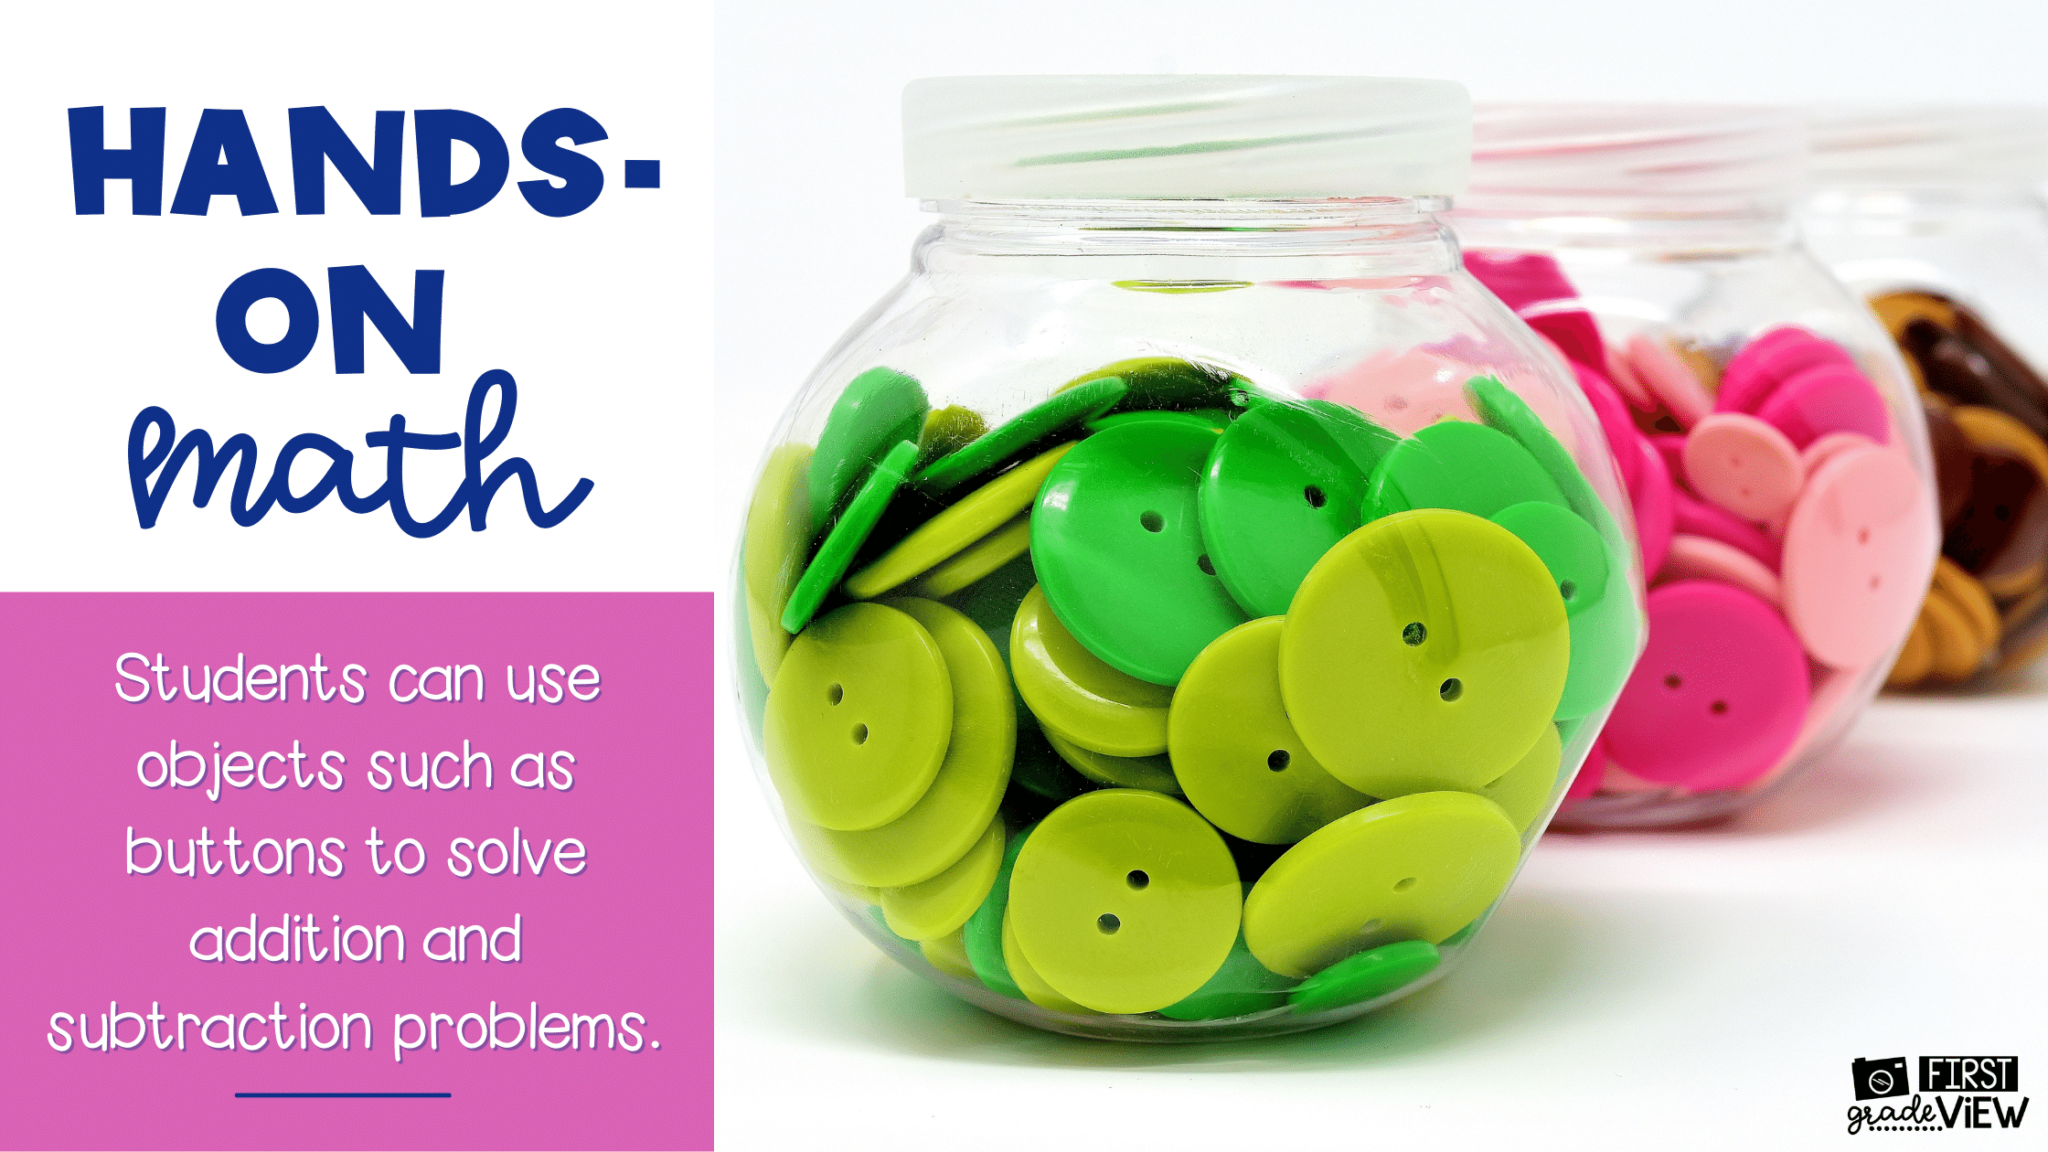 hands-on math activity using buttons as math counters